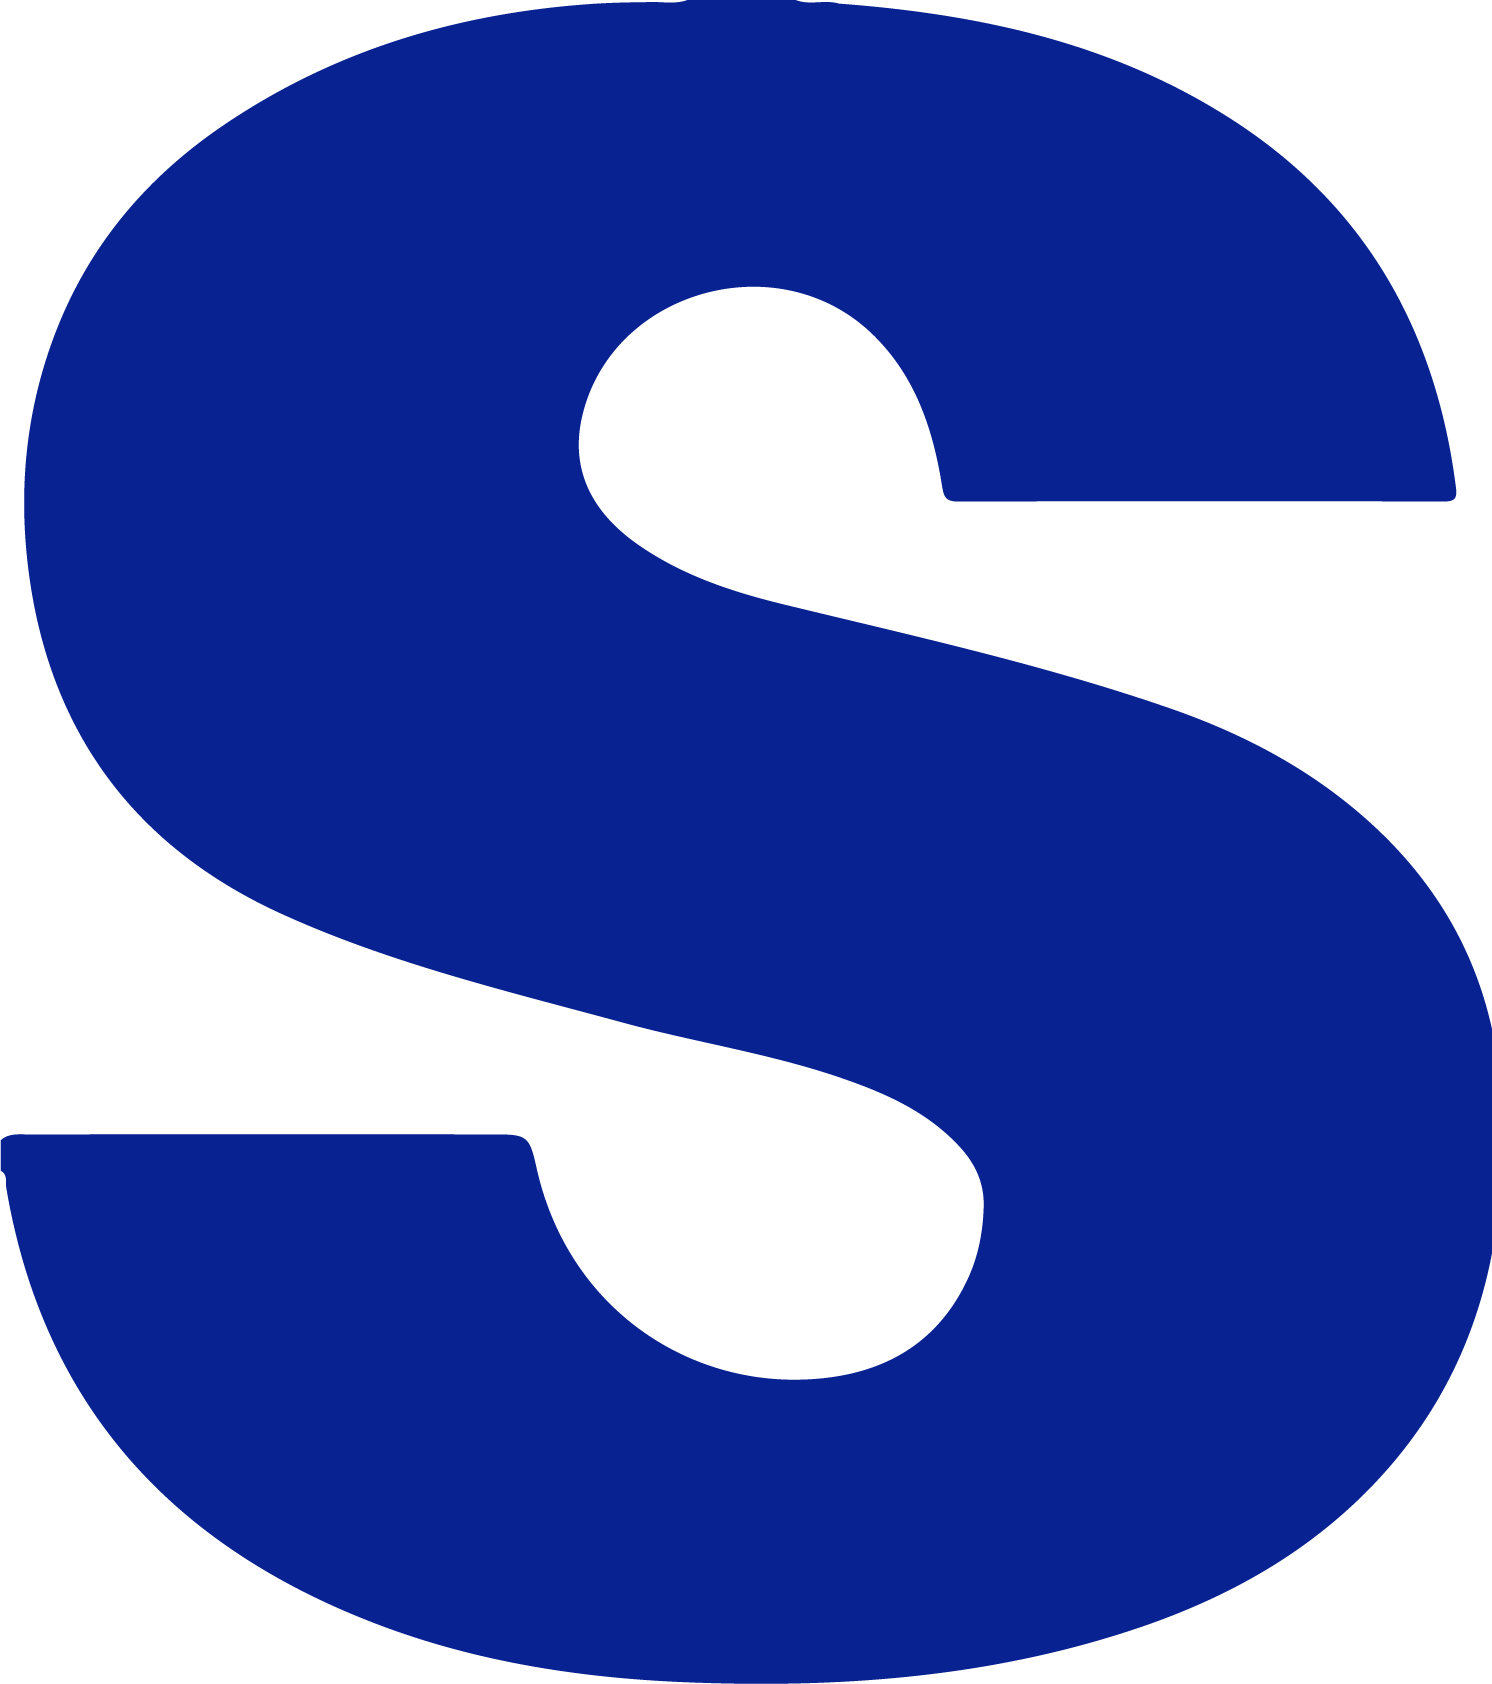 Southern Petrochemical Industries Corp logo (PNG transparent)